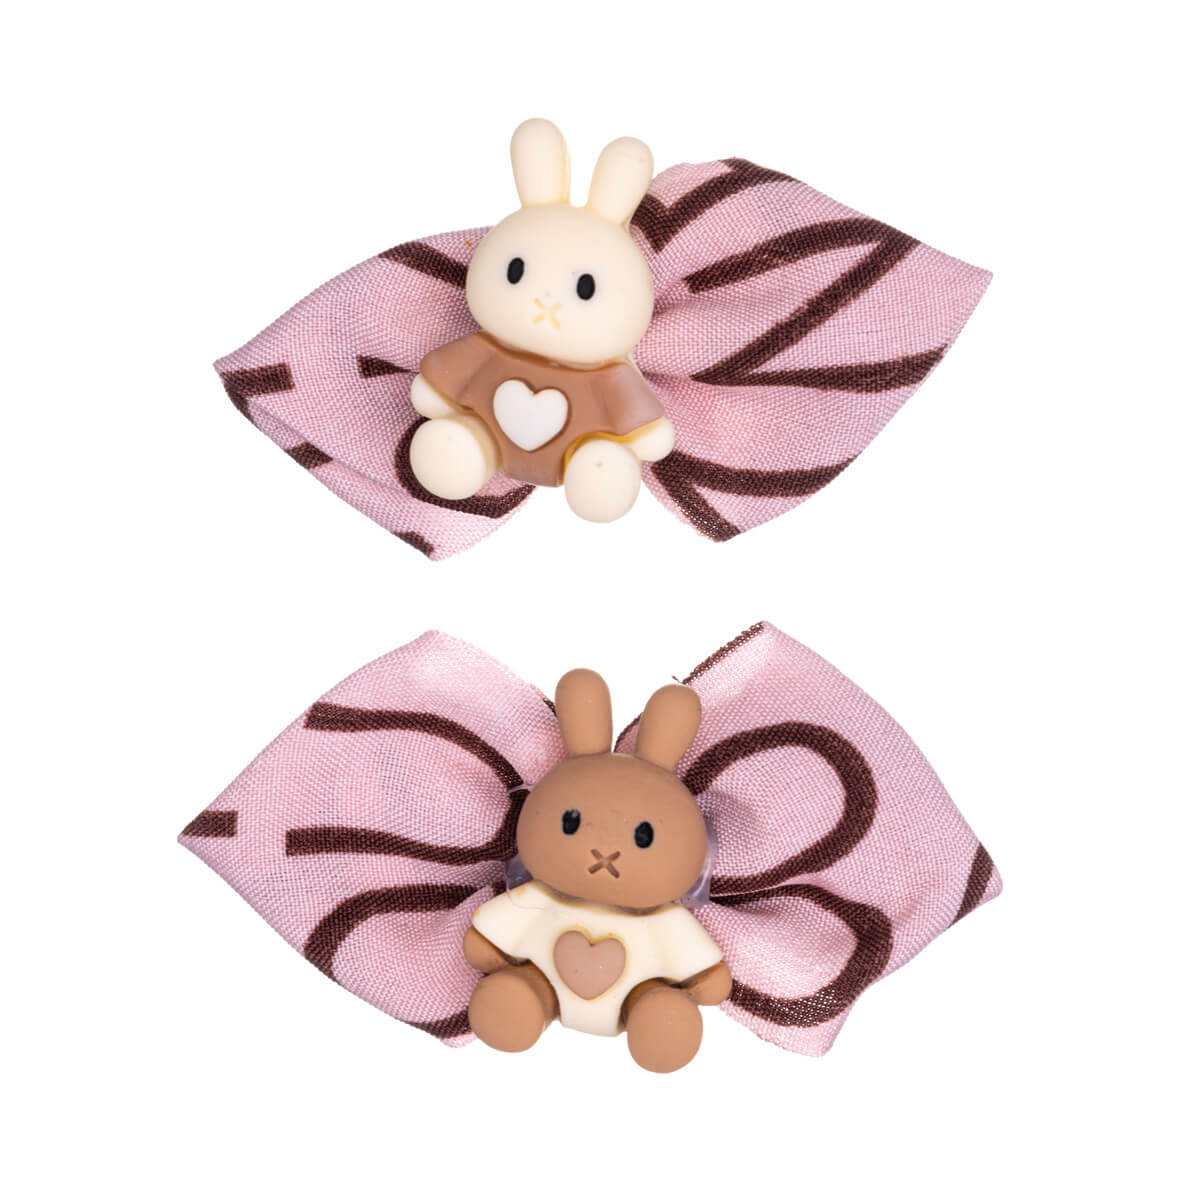 Children's hair clip with teddy bear and bow 2pcs